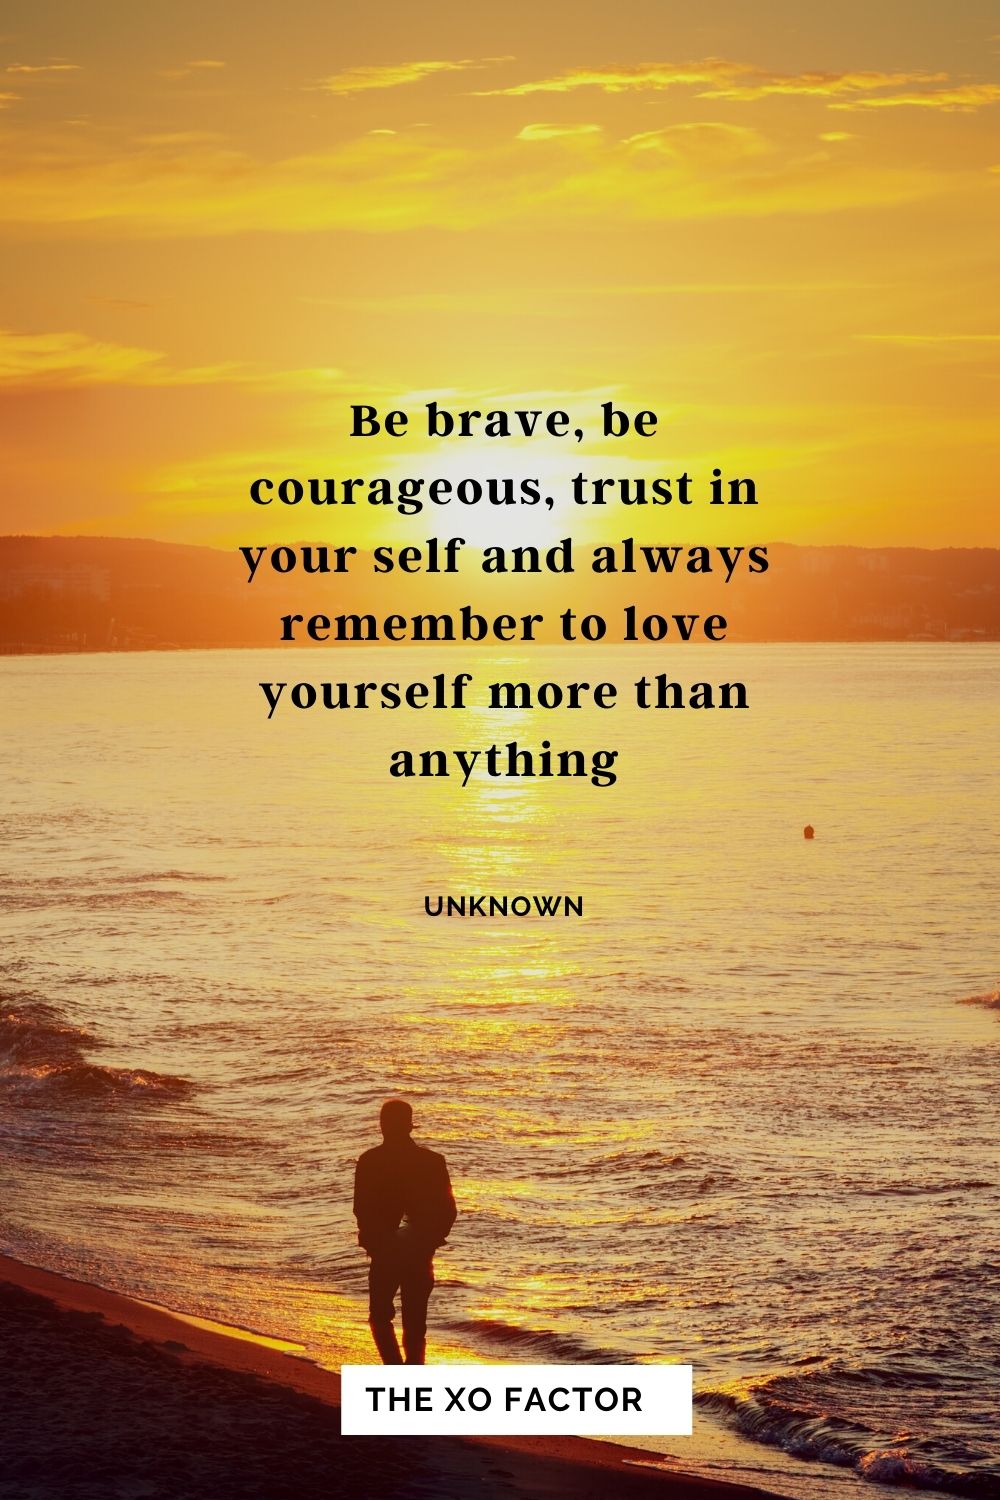 Be brave, be courageous, trust in your self and always remember to love yourself more than anything Unknown